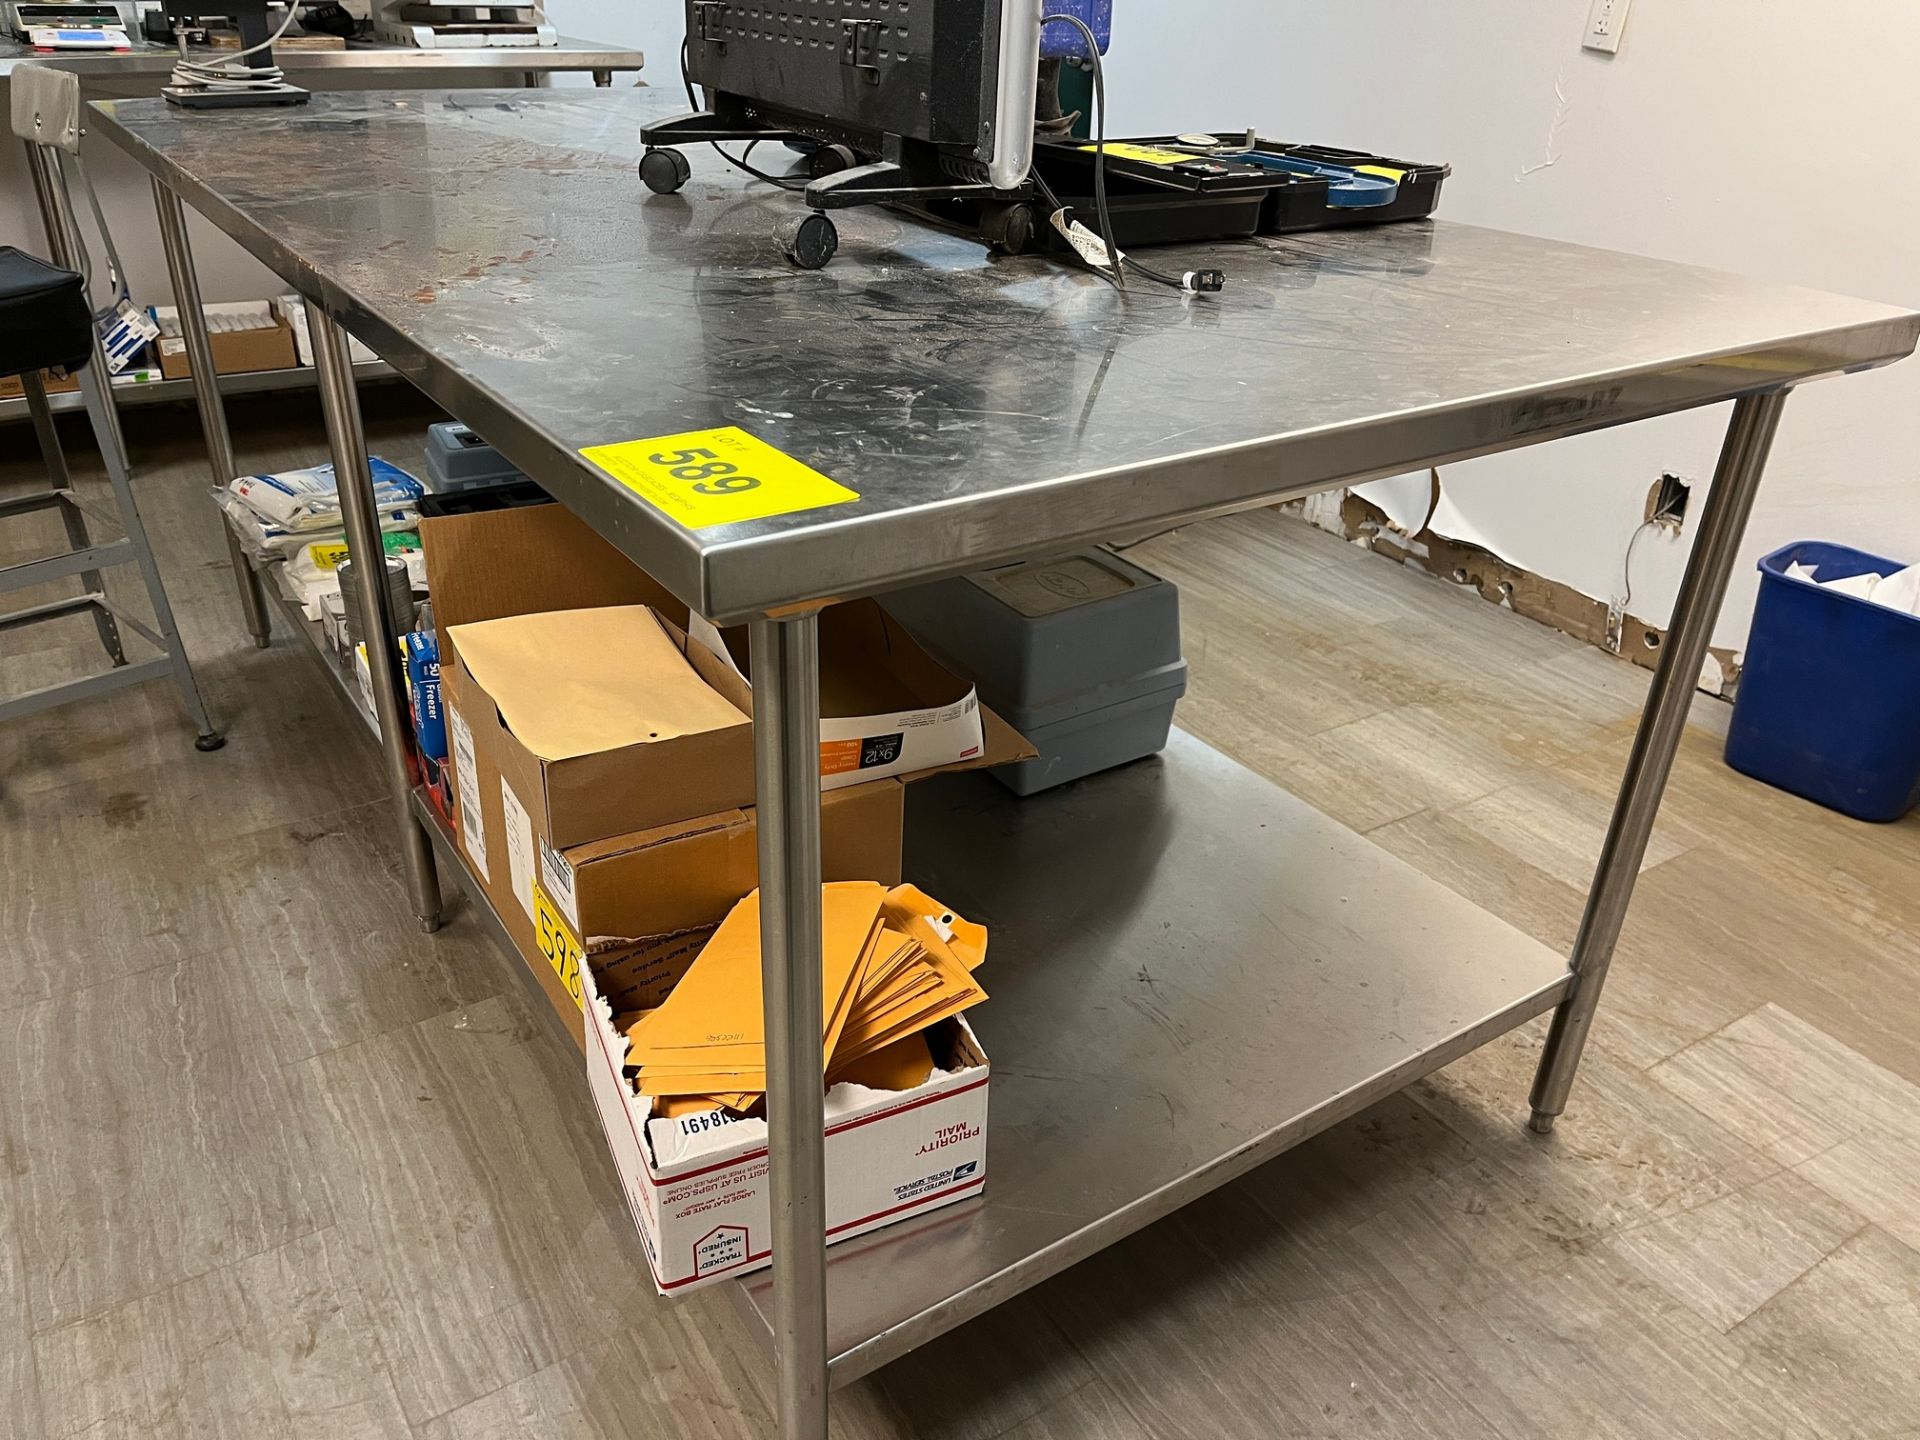 STAINLESS STEEL LAB BENCH, 2-LEVELS, APPROX. 4'D X 8'L X 40"H (NO CONTENTS) (PM BUILDING EAST LAB)